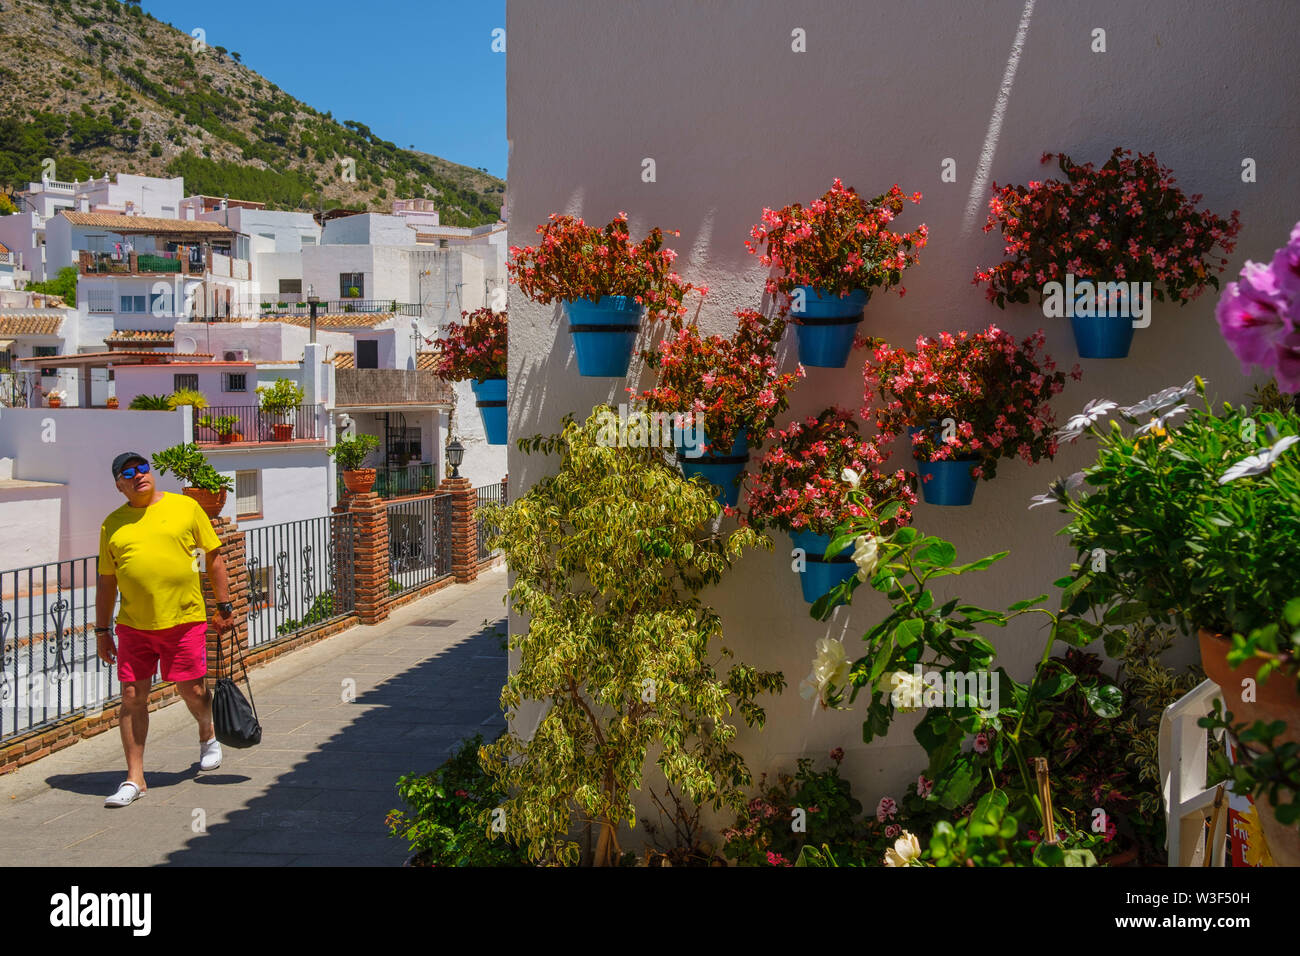 Typical street with flowers, white village of Mijas. Malaga province Costa del Sol. Andalusia, Southern Spain Europe Stock Photo